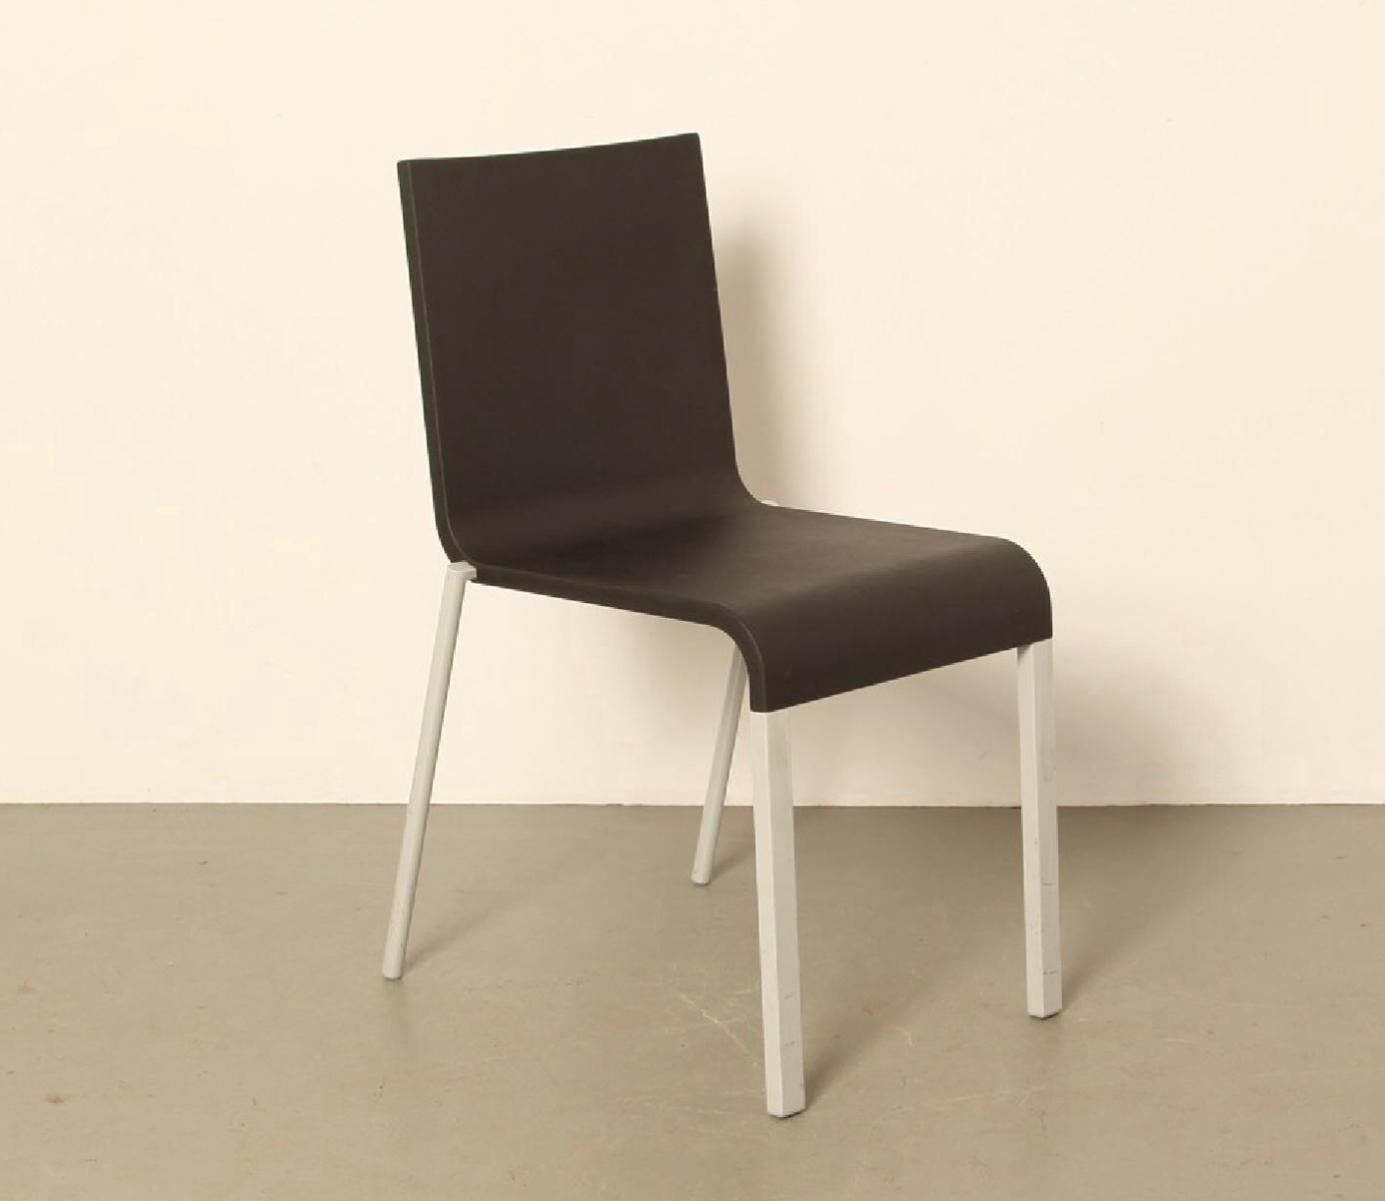 The M.O. of designer Maarten van Severen is simplicity and comfort. Nowhere is this better exemplified than in his Vitra .03 stacking chair. The slim profile is made possible through the use of a thin and flexible, yet strong polyurethane foam seat